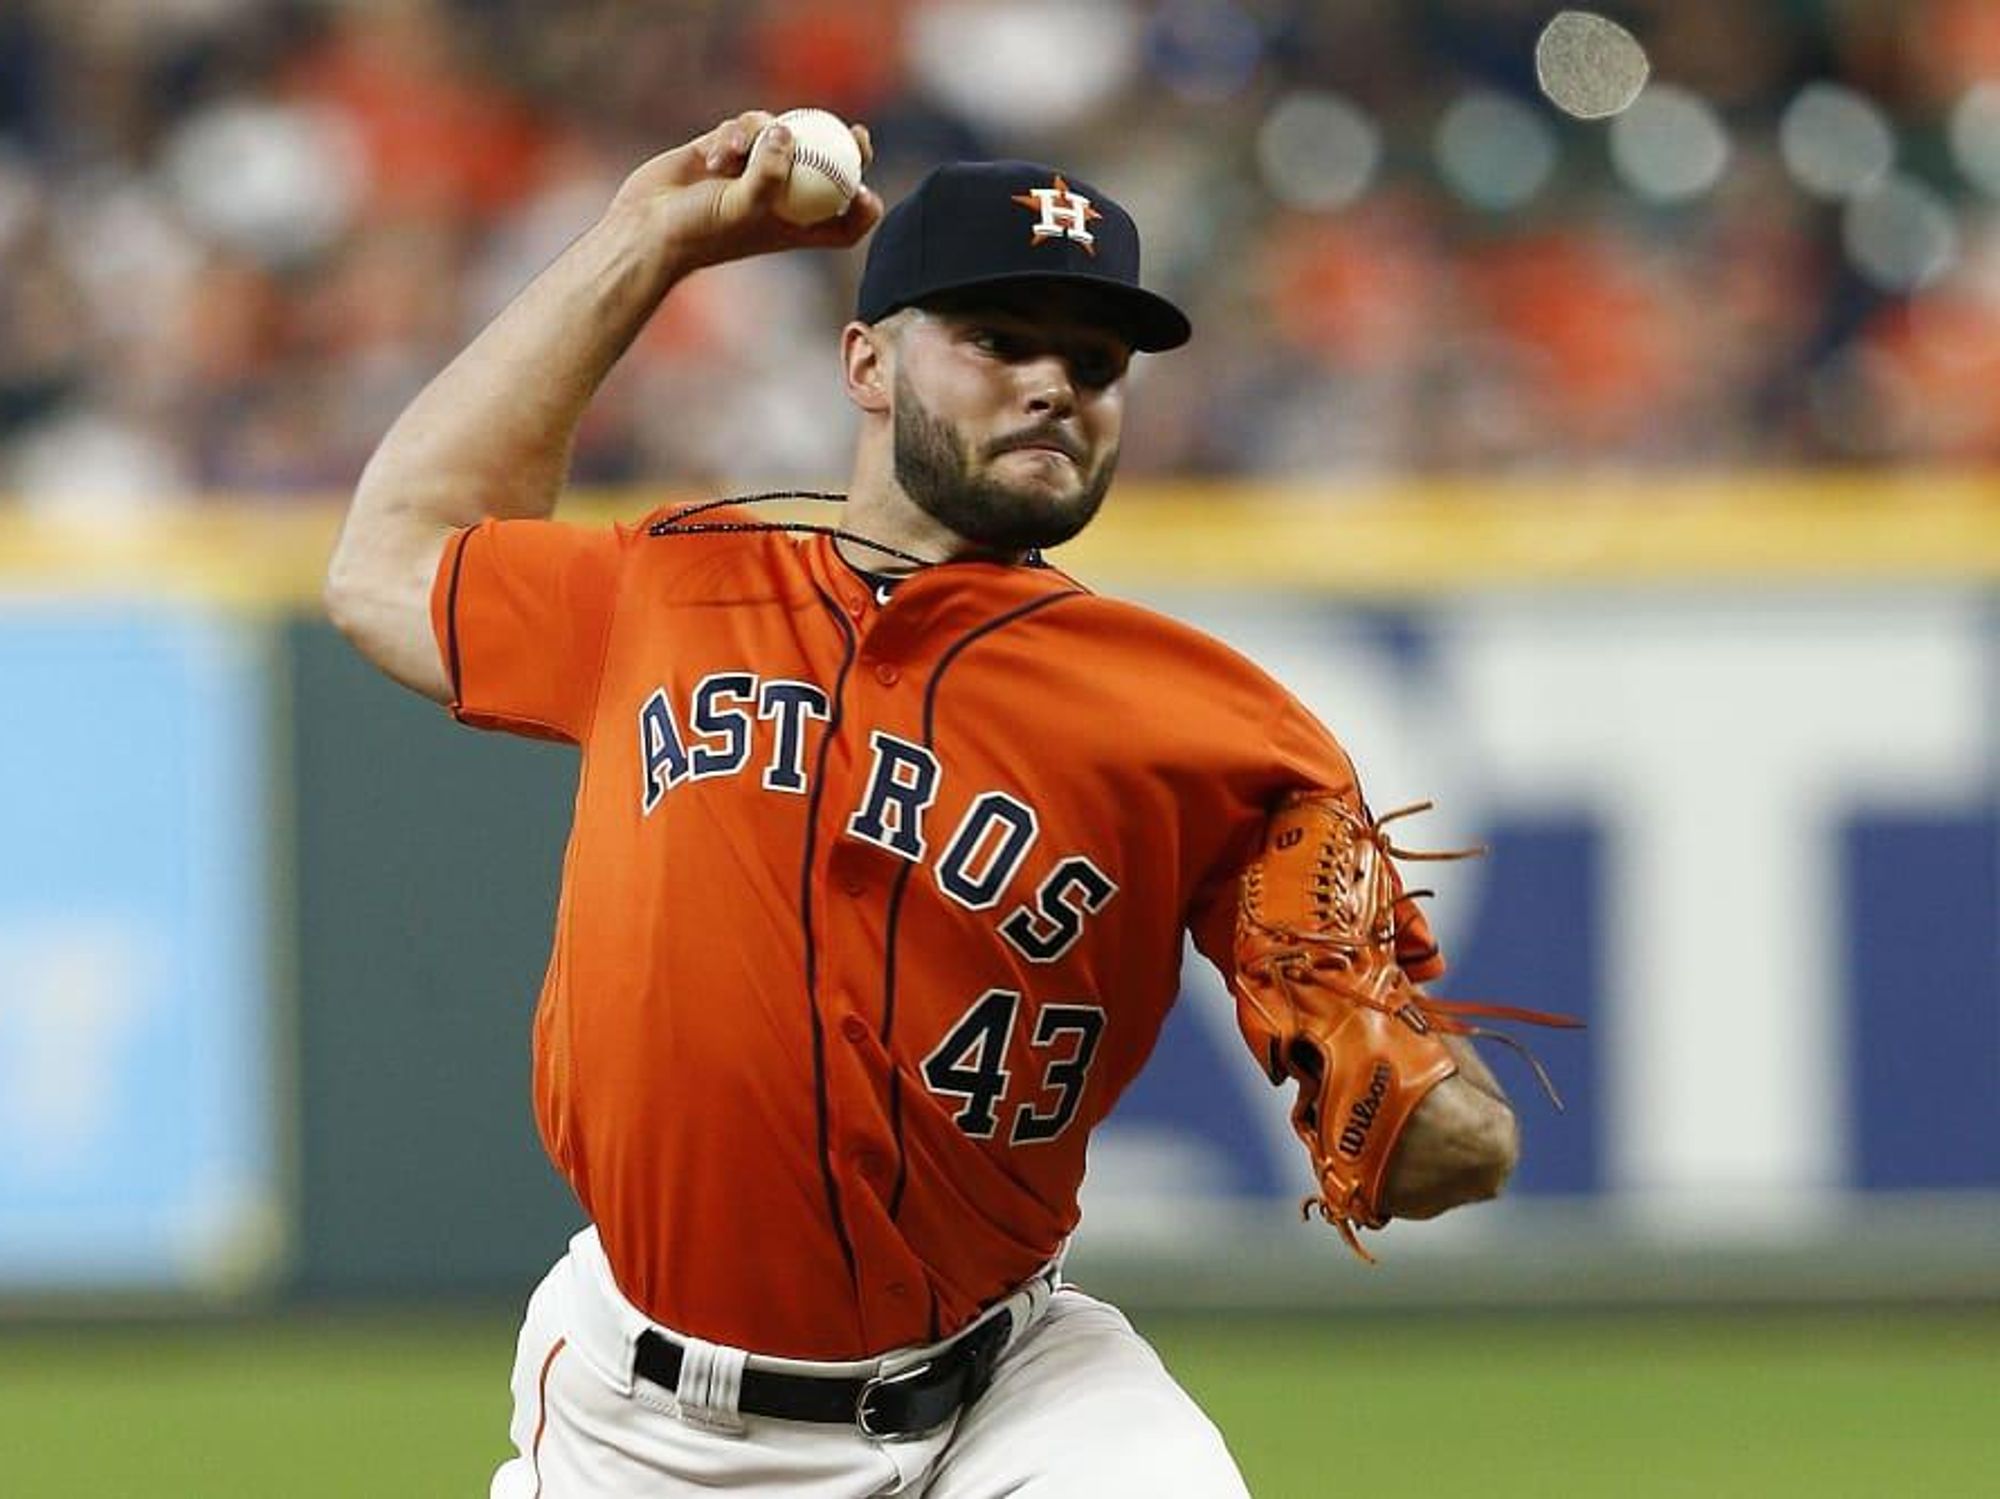 Houston Astros Back to Blue-and-Orange Uniforms in 2013